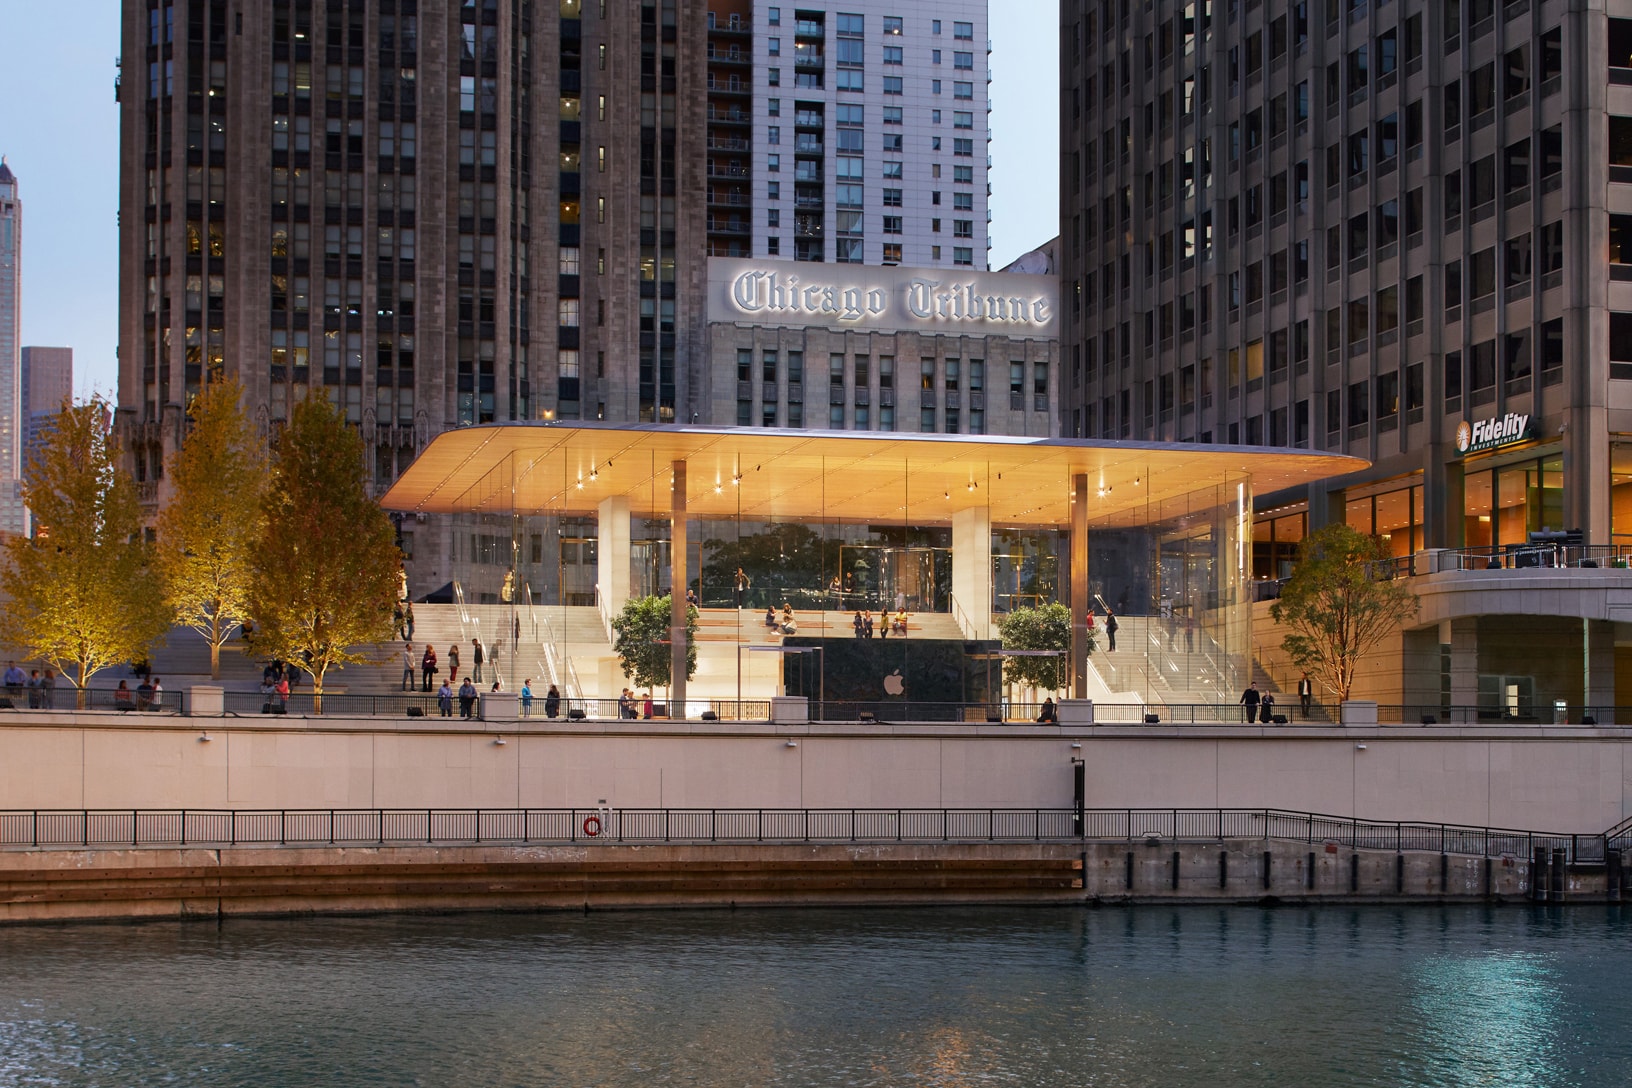 Apple Store Michigan Avenue Chicago 2017 October 20 Grand Opening 23 The Chicago Series